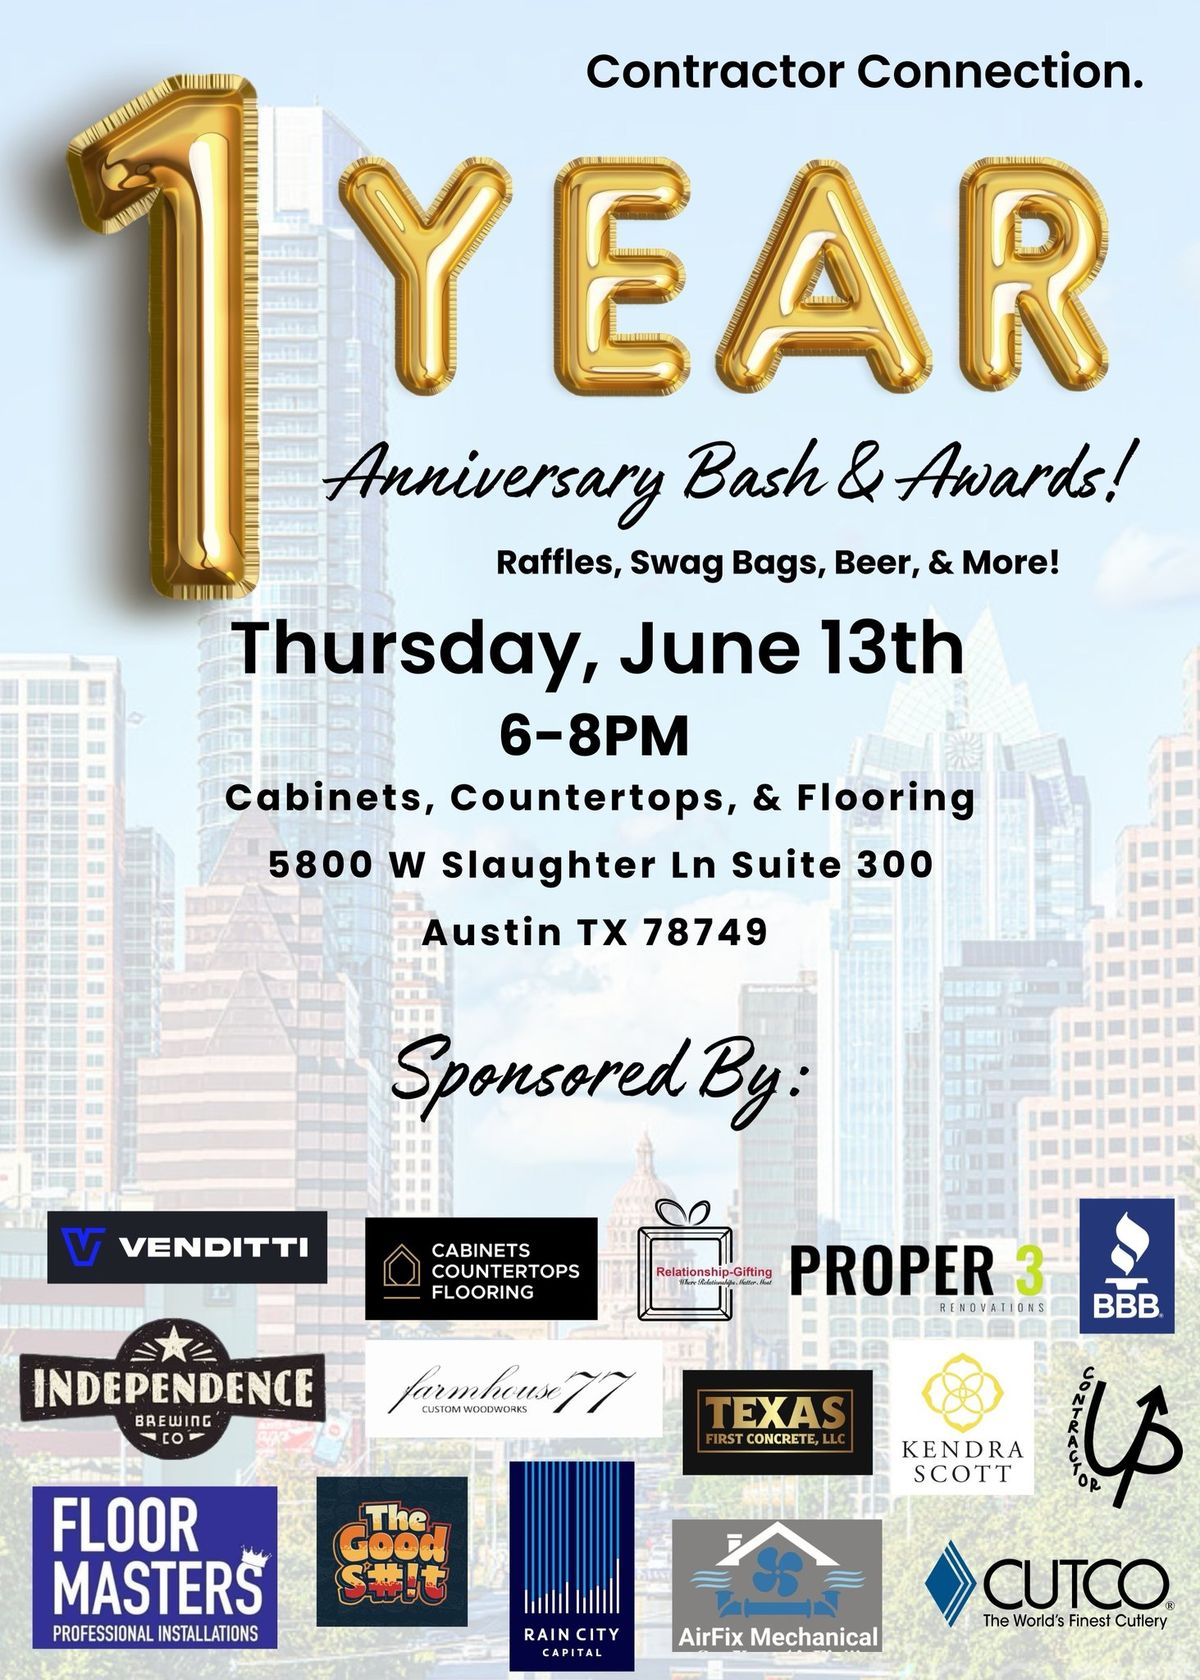 Contractor Connection Anniversary Bash